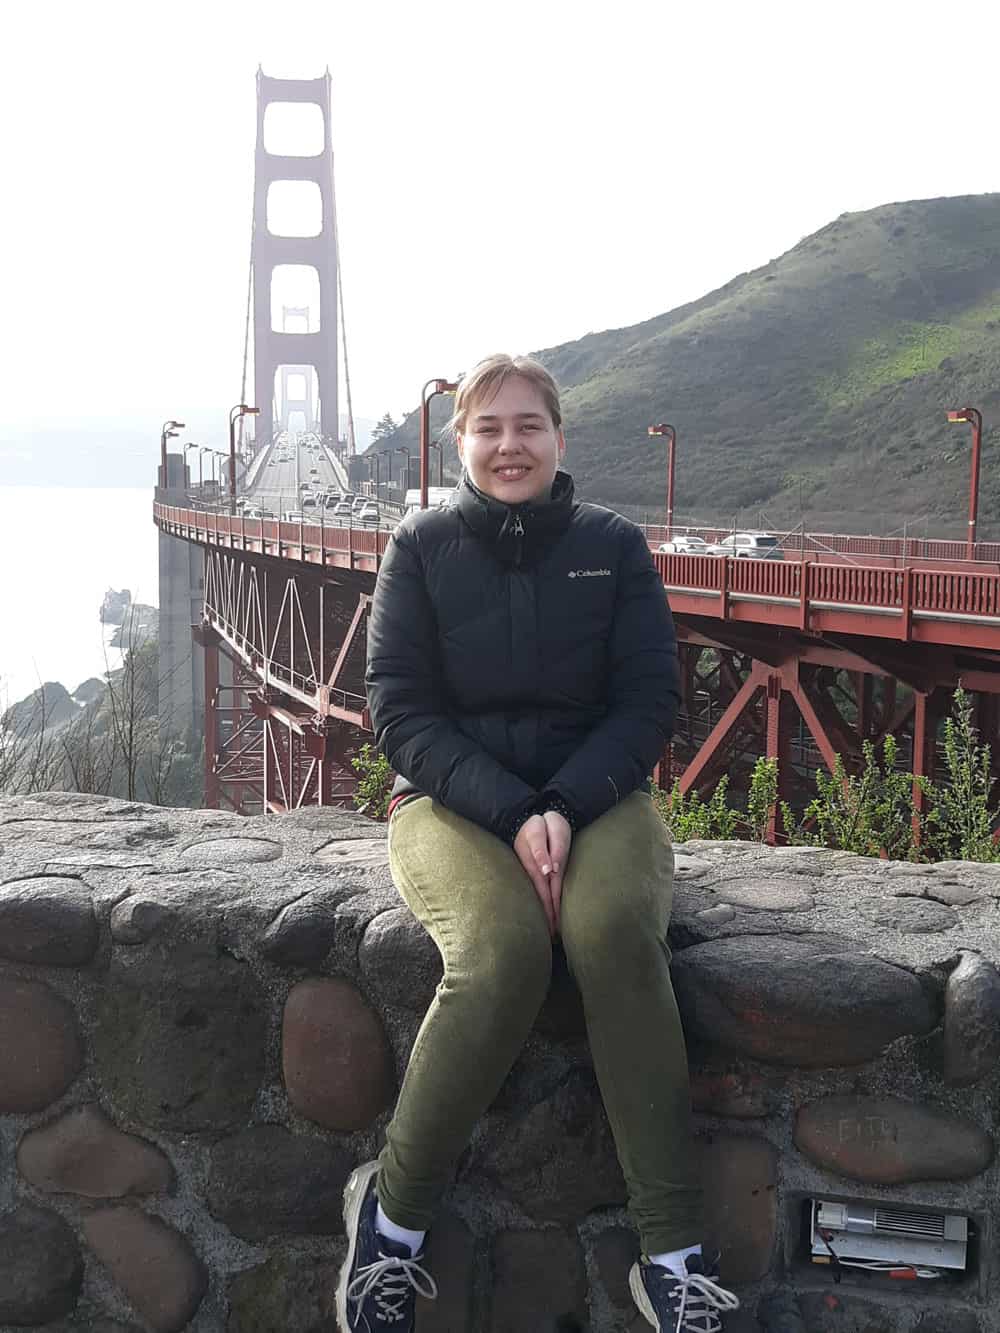 This is a photo of Angela Campbell on the Golden Gate Bridge.